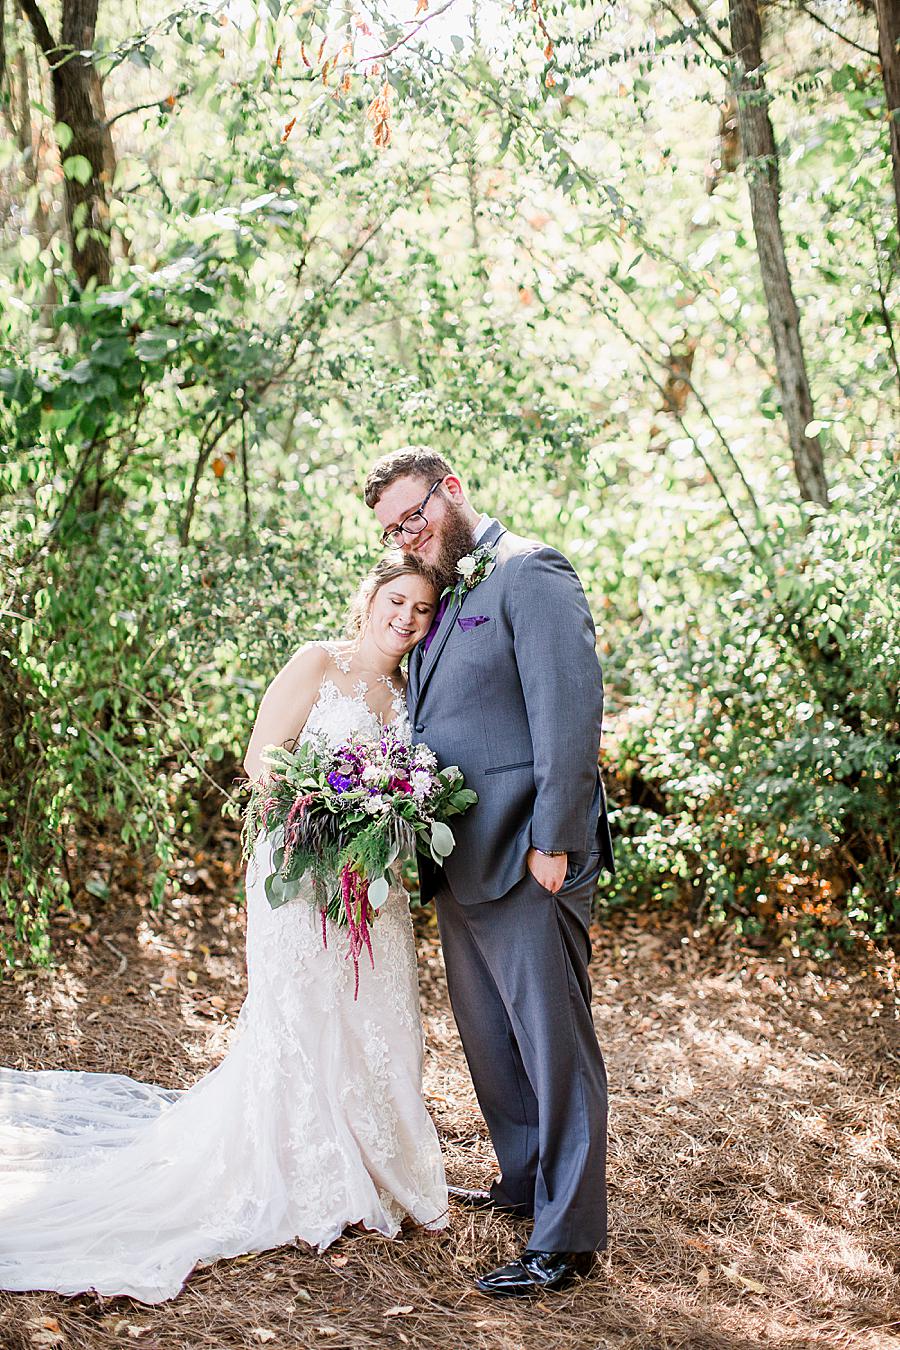 Mr. and Mrs. at this Hunter Valley Pavilion wedding by Knoxville Wedding Photographer, Amanda May Photos.